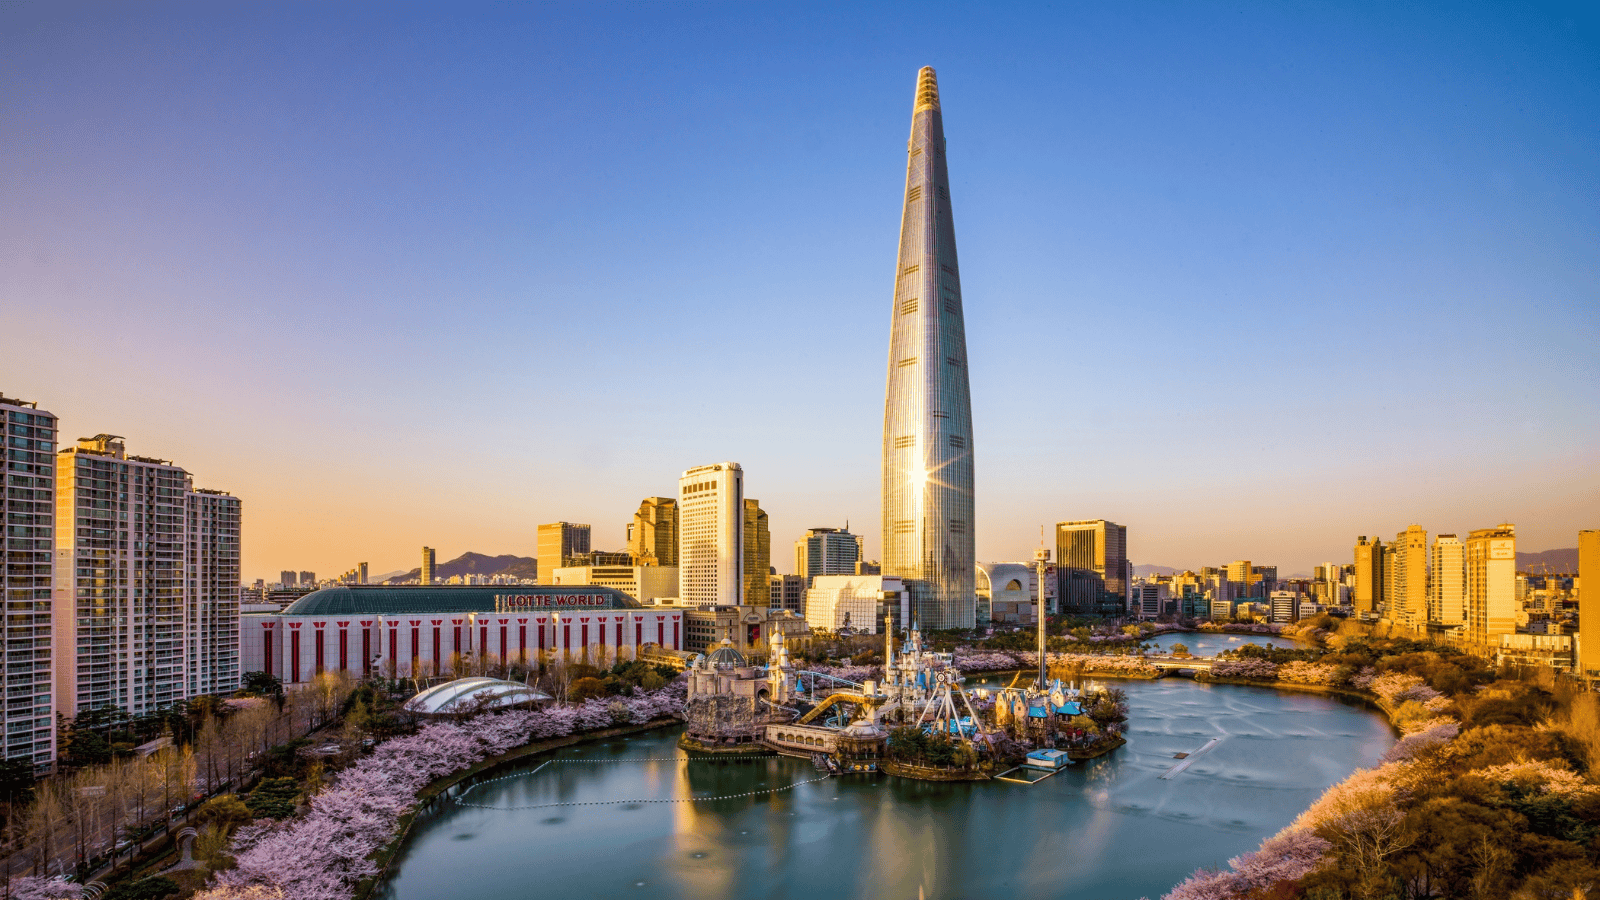 <p>Seoul has emerged as a top destination for tourists with disabilities. Many Seoul landmarks, such as Gyeongbokgung Palace, Changdeokgung Palace, and N Seoul Tower, have entrances and facilities for guests with mobility concerns. </p><p>However, some historical sites may be inaccessible due to their age and architectural features. Seoul’s public transportation system, including the subway and buses, features wheelchair ramps, elevators, and designated seating areas for disabled visitors.</p>